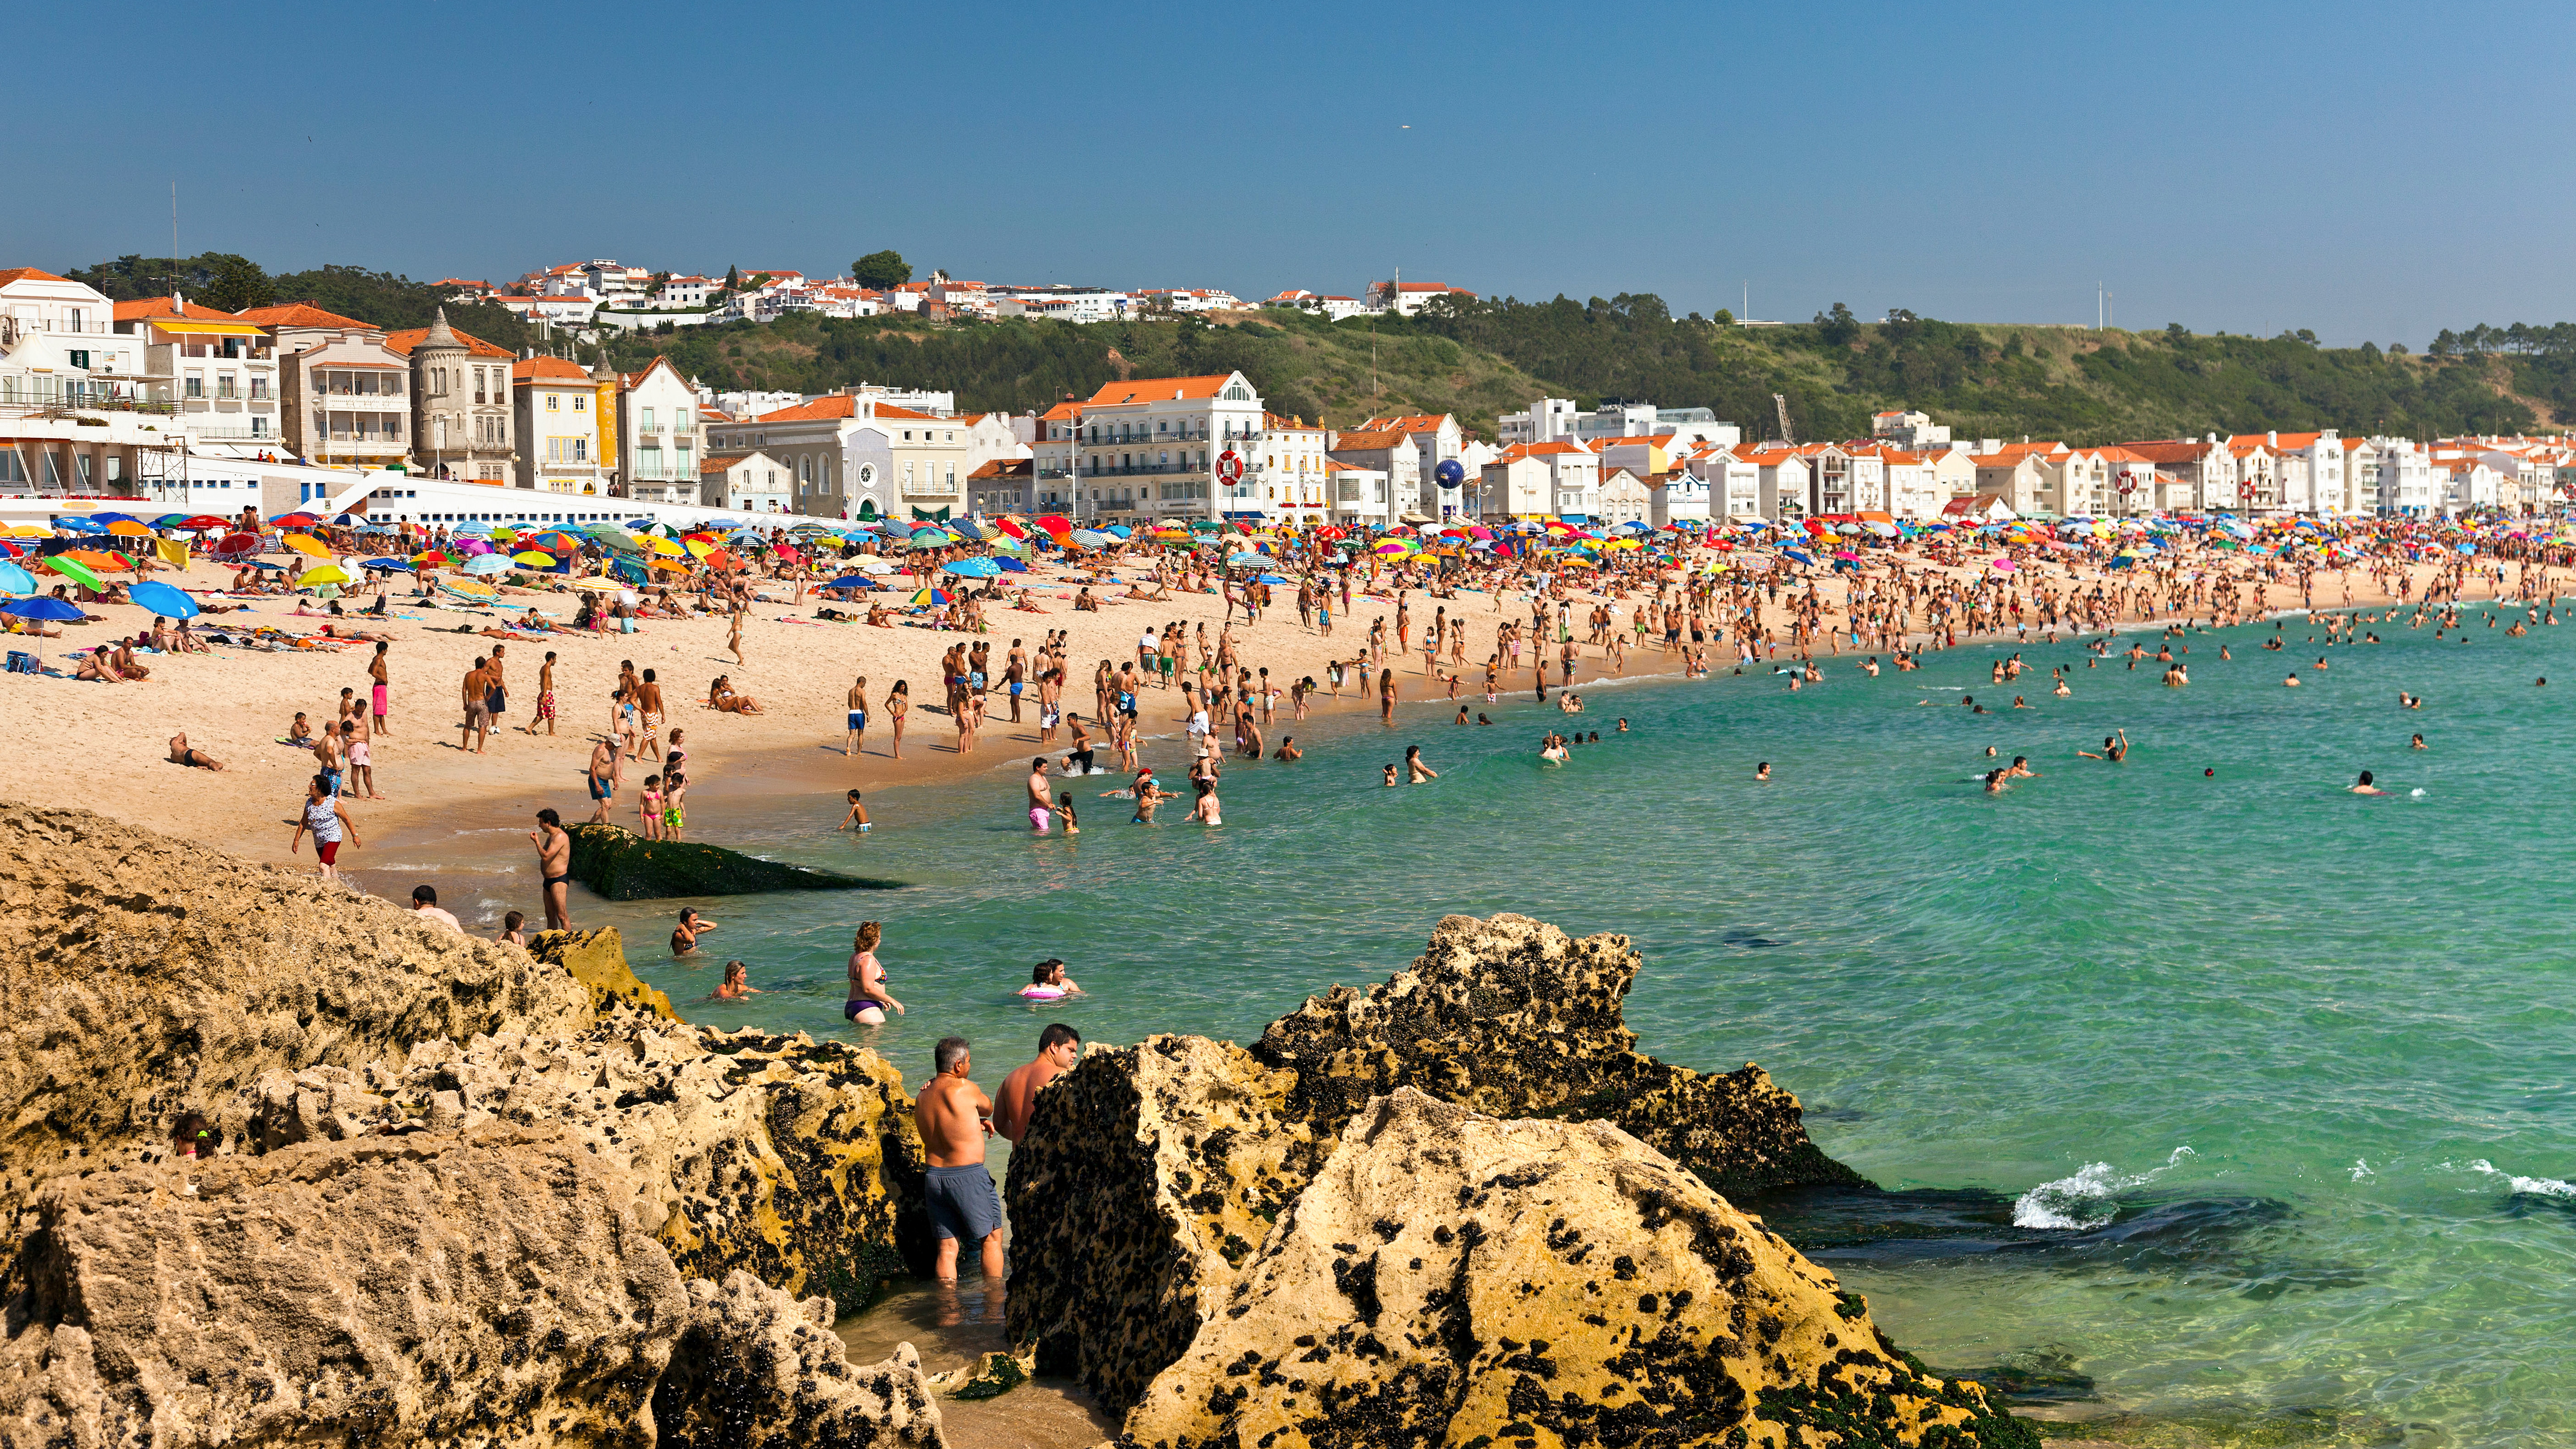 23 Best Places to Go in Spain and Portugal in 2023, According to